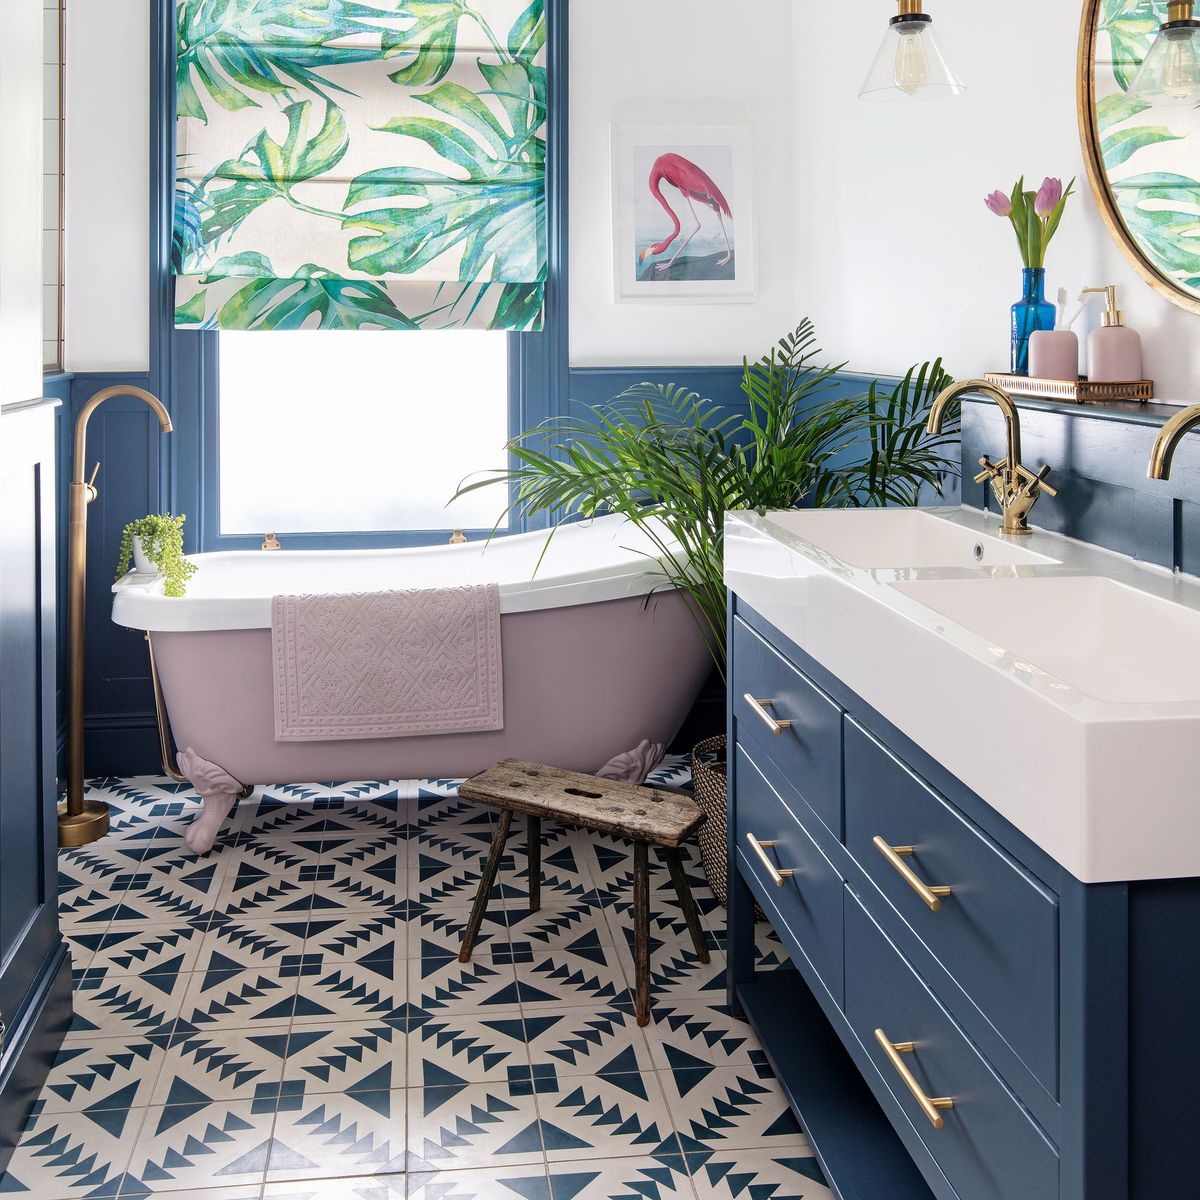 6 bathroom flooring mistakes to avoid, according to the experts